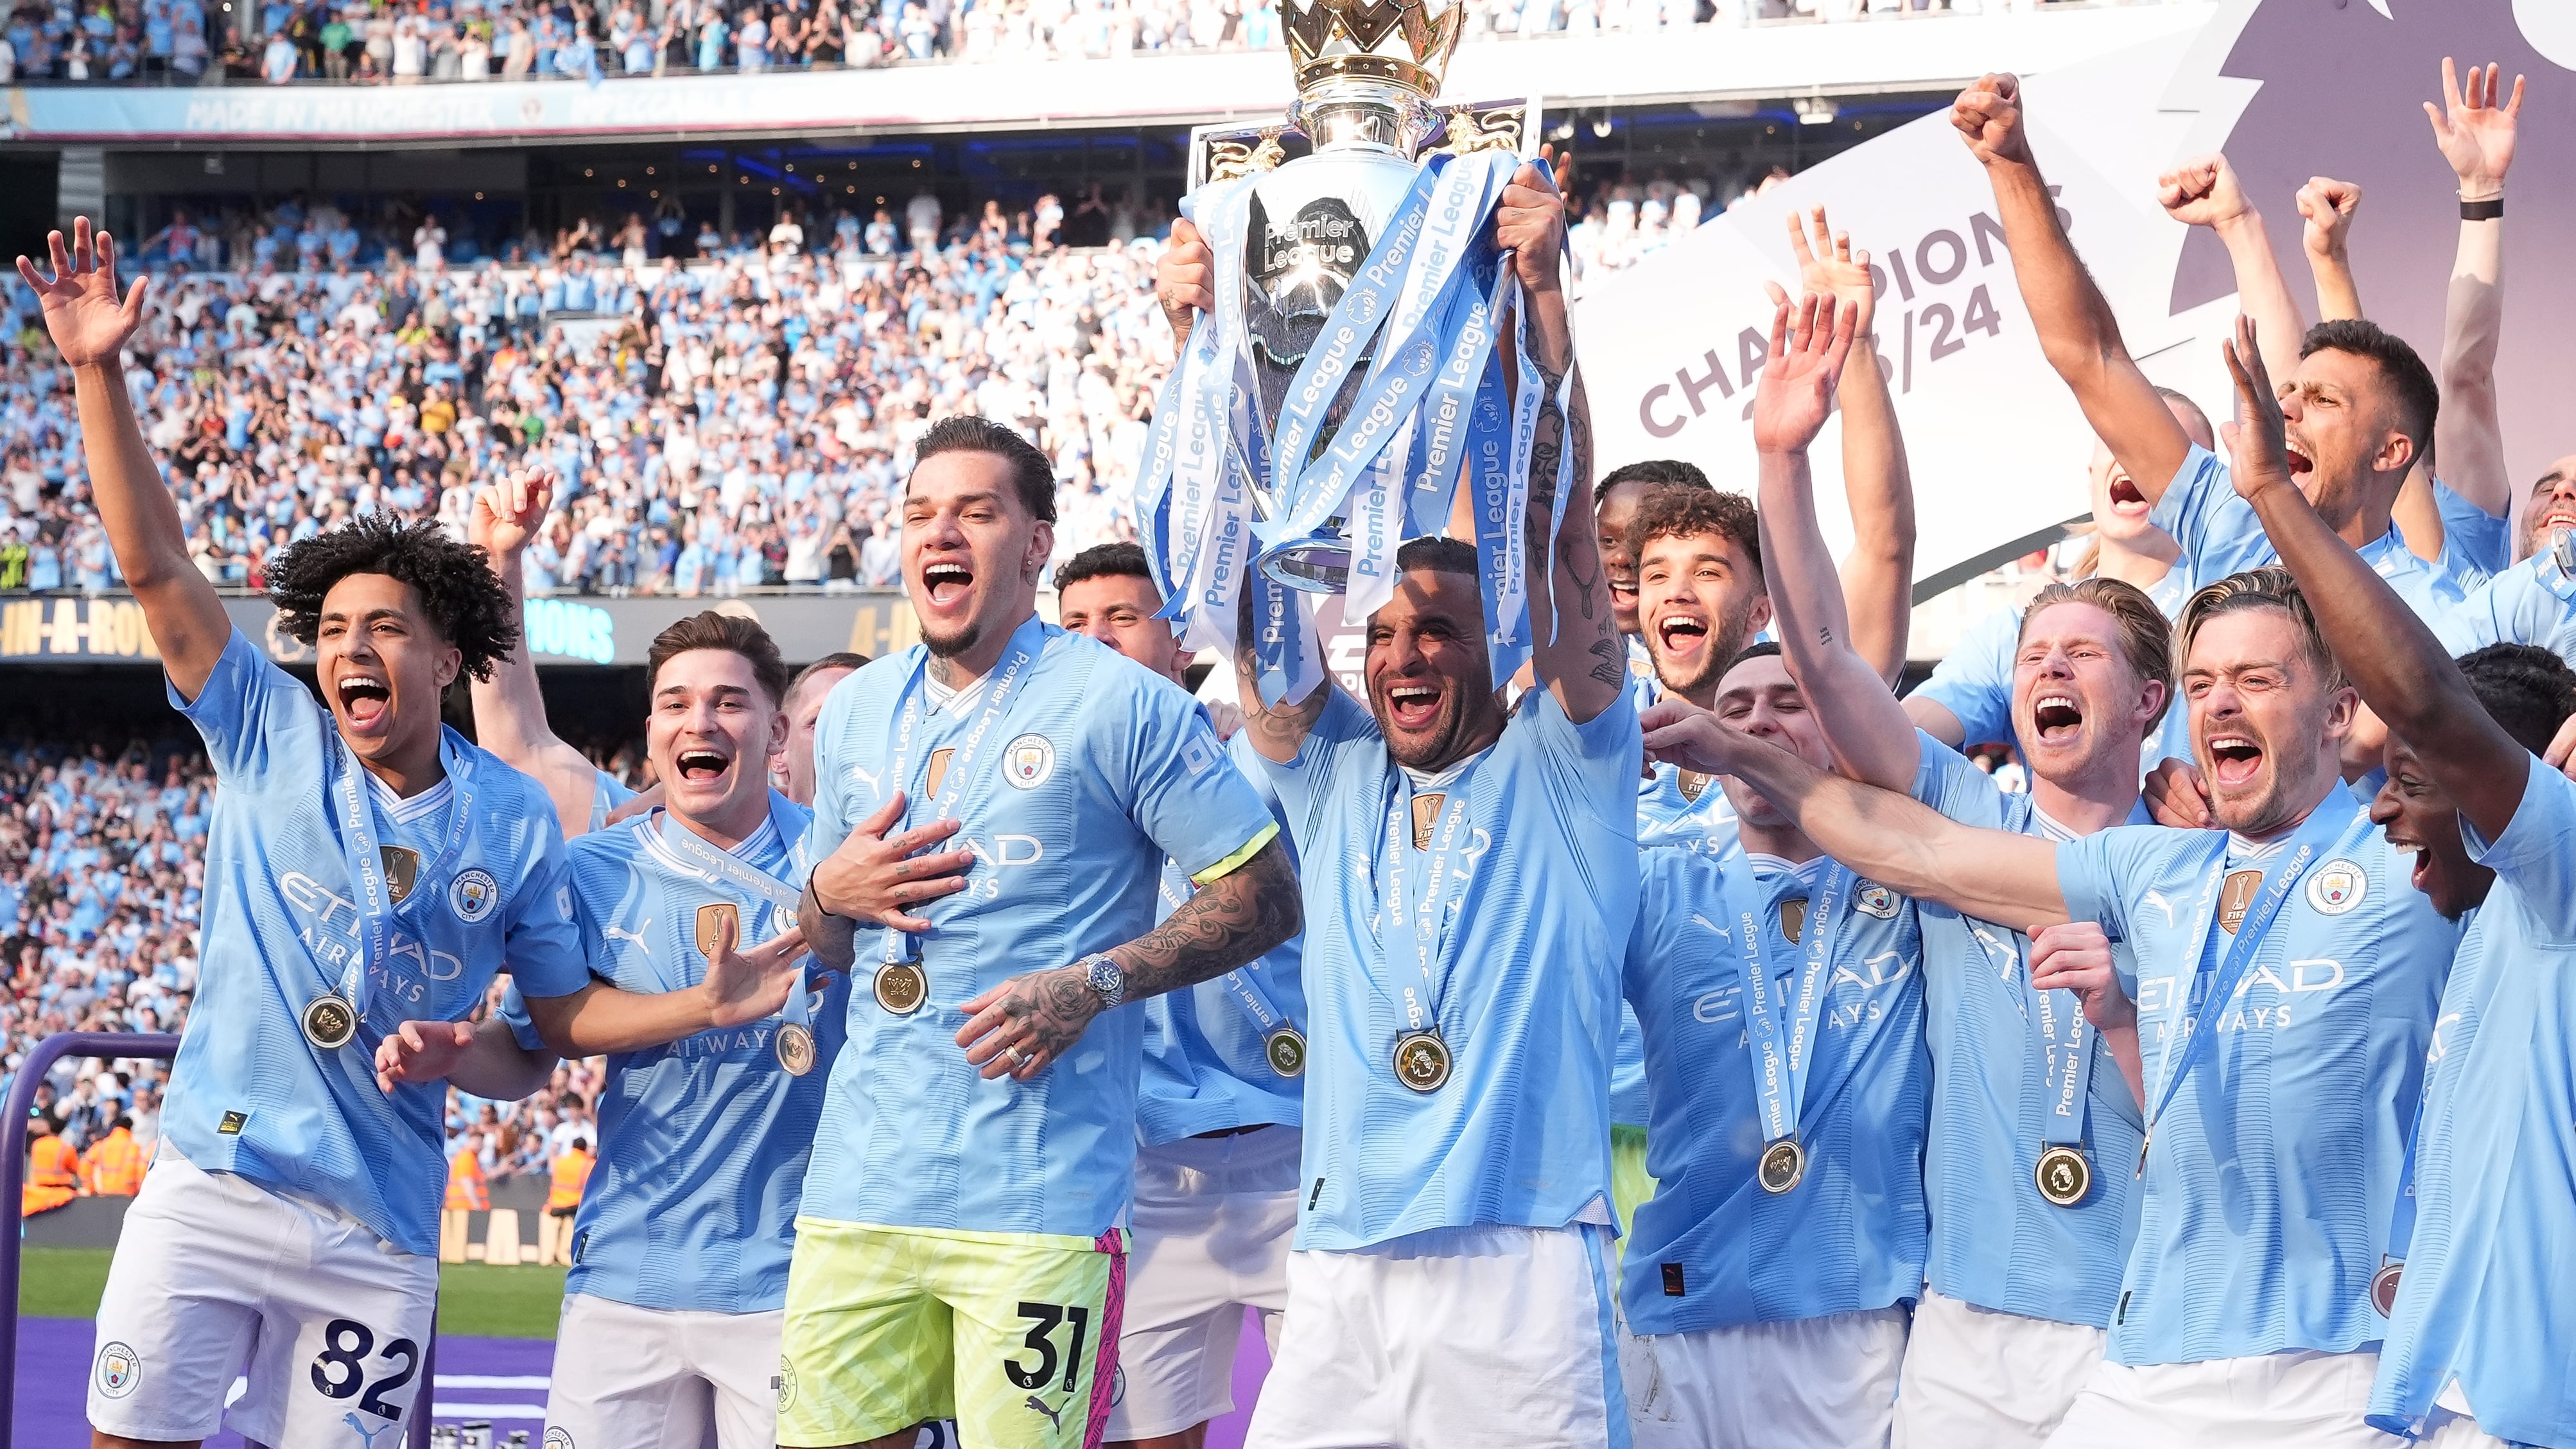 Manchester City’s bid for a fifth straight Premier League title will begin away to Chelsea